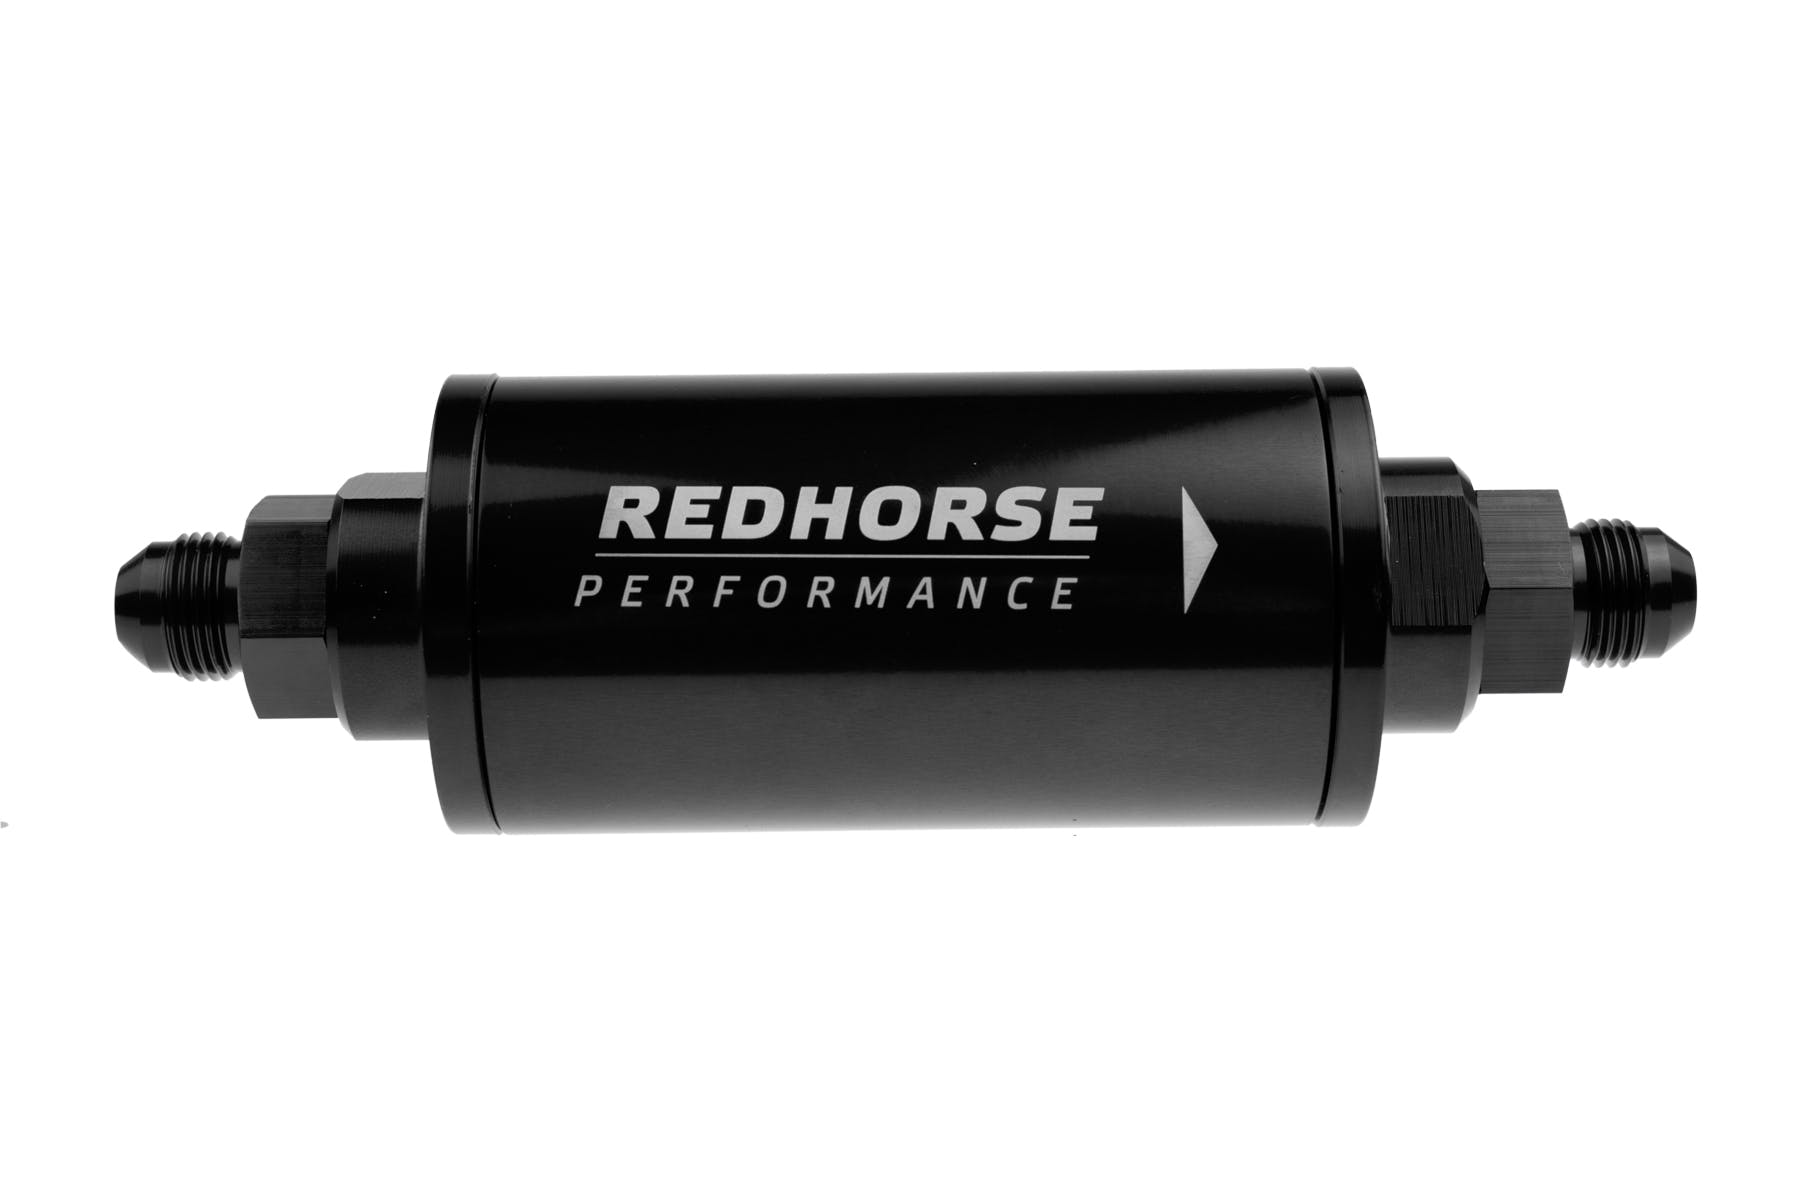 Redhorse Performance 4651-08-2 6in Cylindrical In-Line Race Fuel Filter - 08 AN